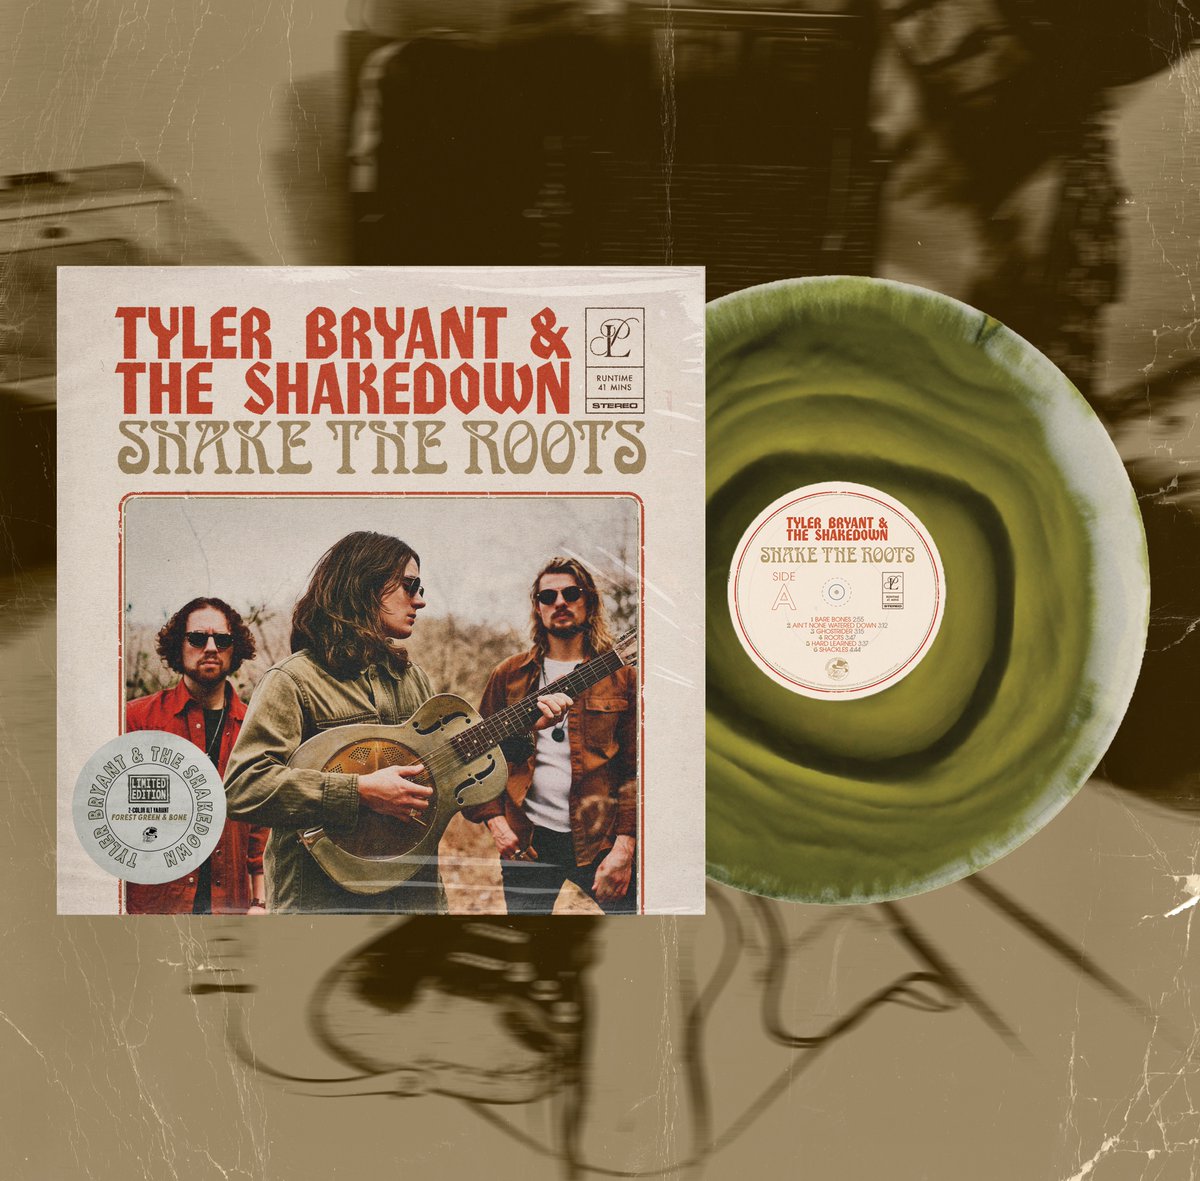 A new LIMITED alternate color run of “Shake The Roots” is now available for pre-order! Only 500 total. Get yours quick! ⚡️ tinyurl.com/STRLimitedVinyl